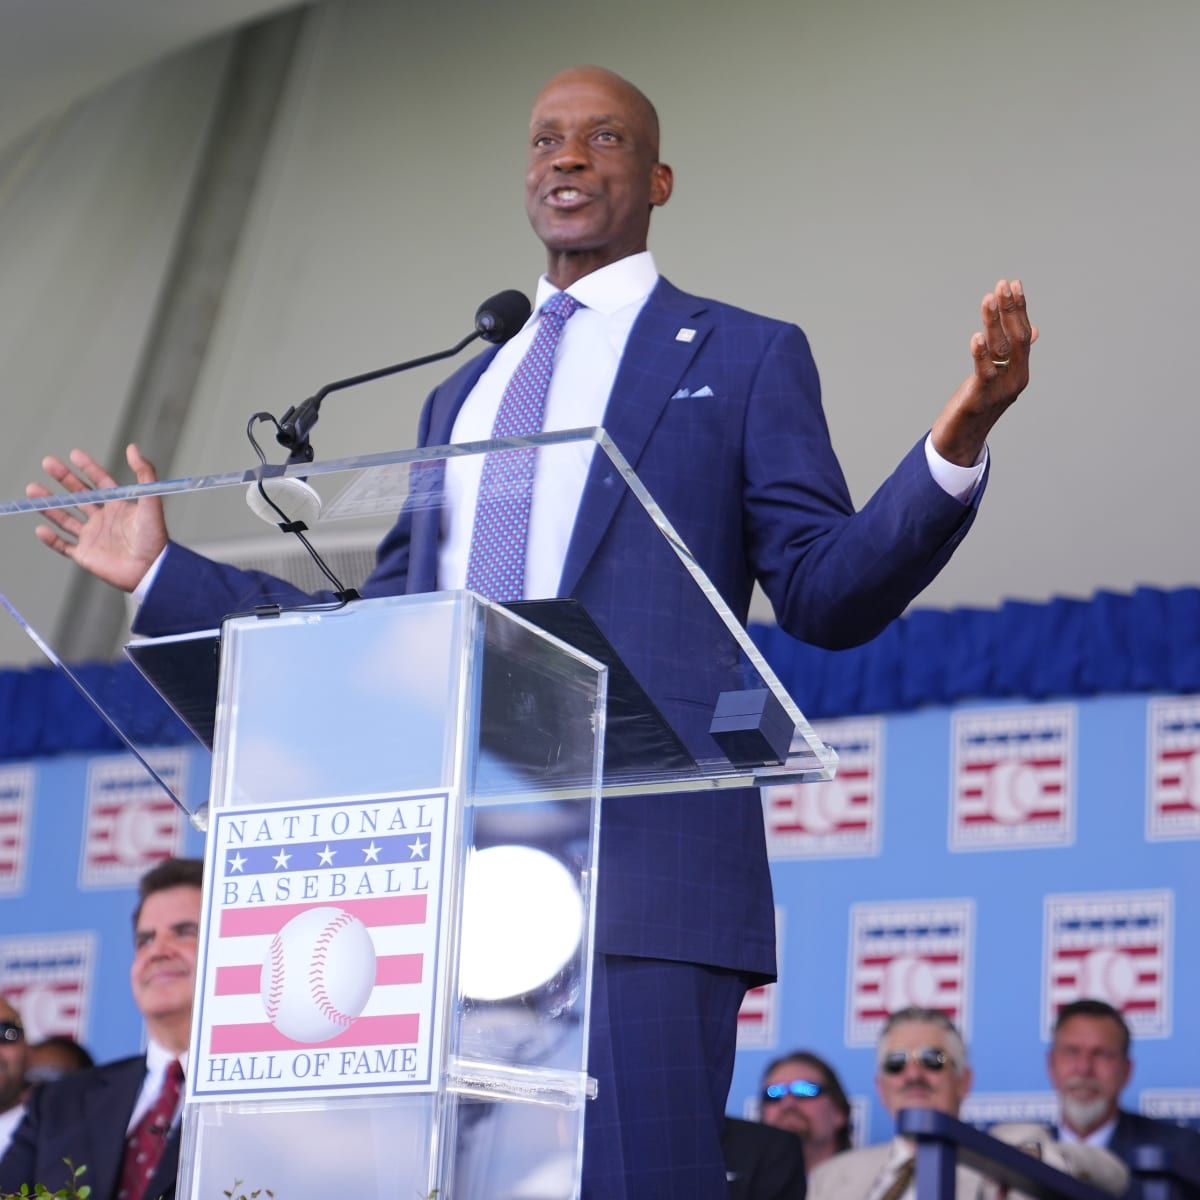 Fred McGriff inducted into Baseball Hall of Fame